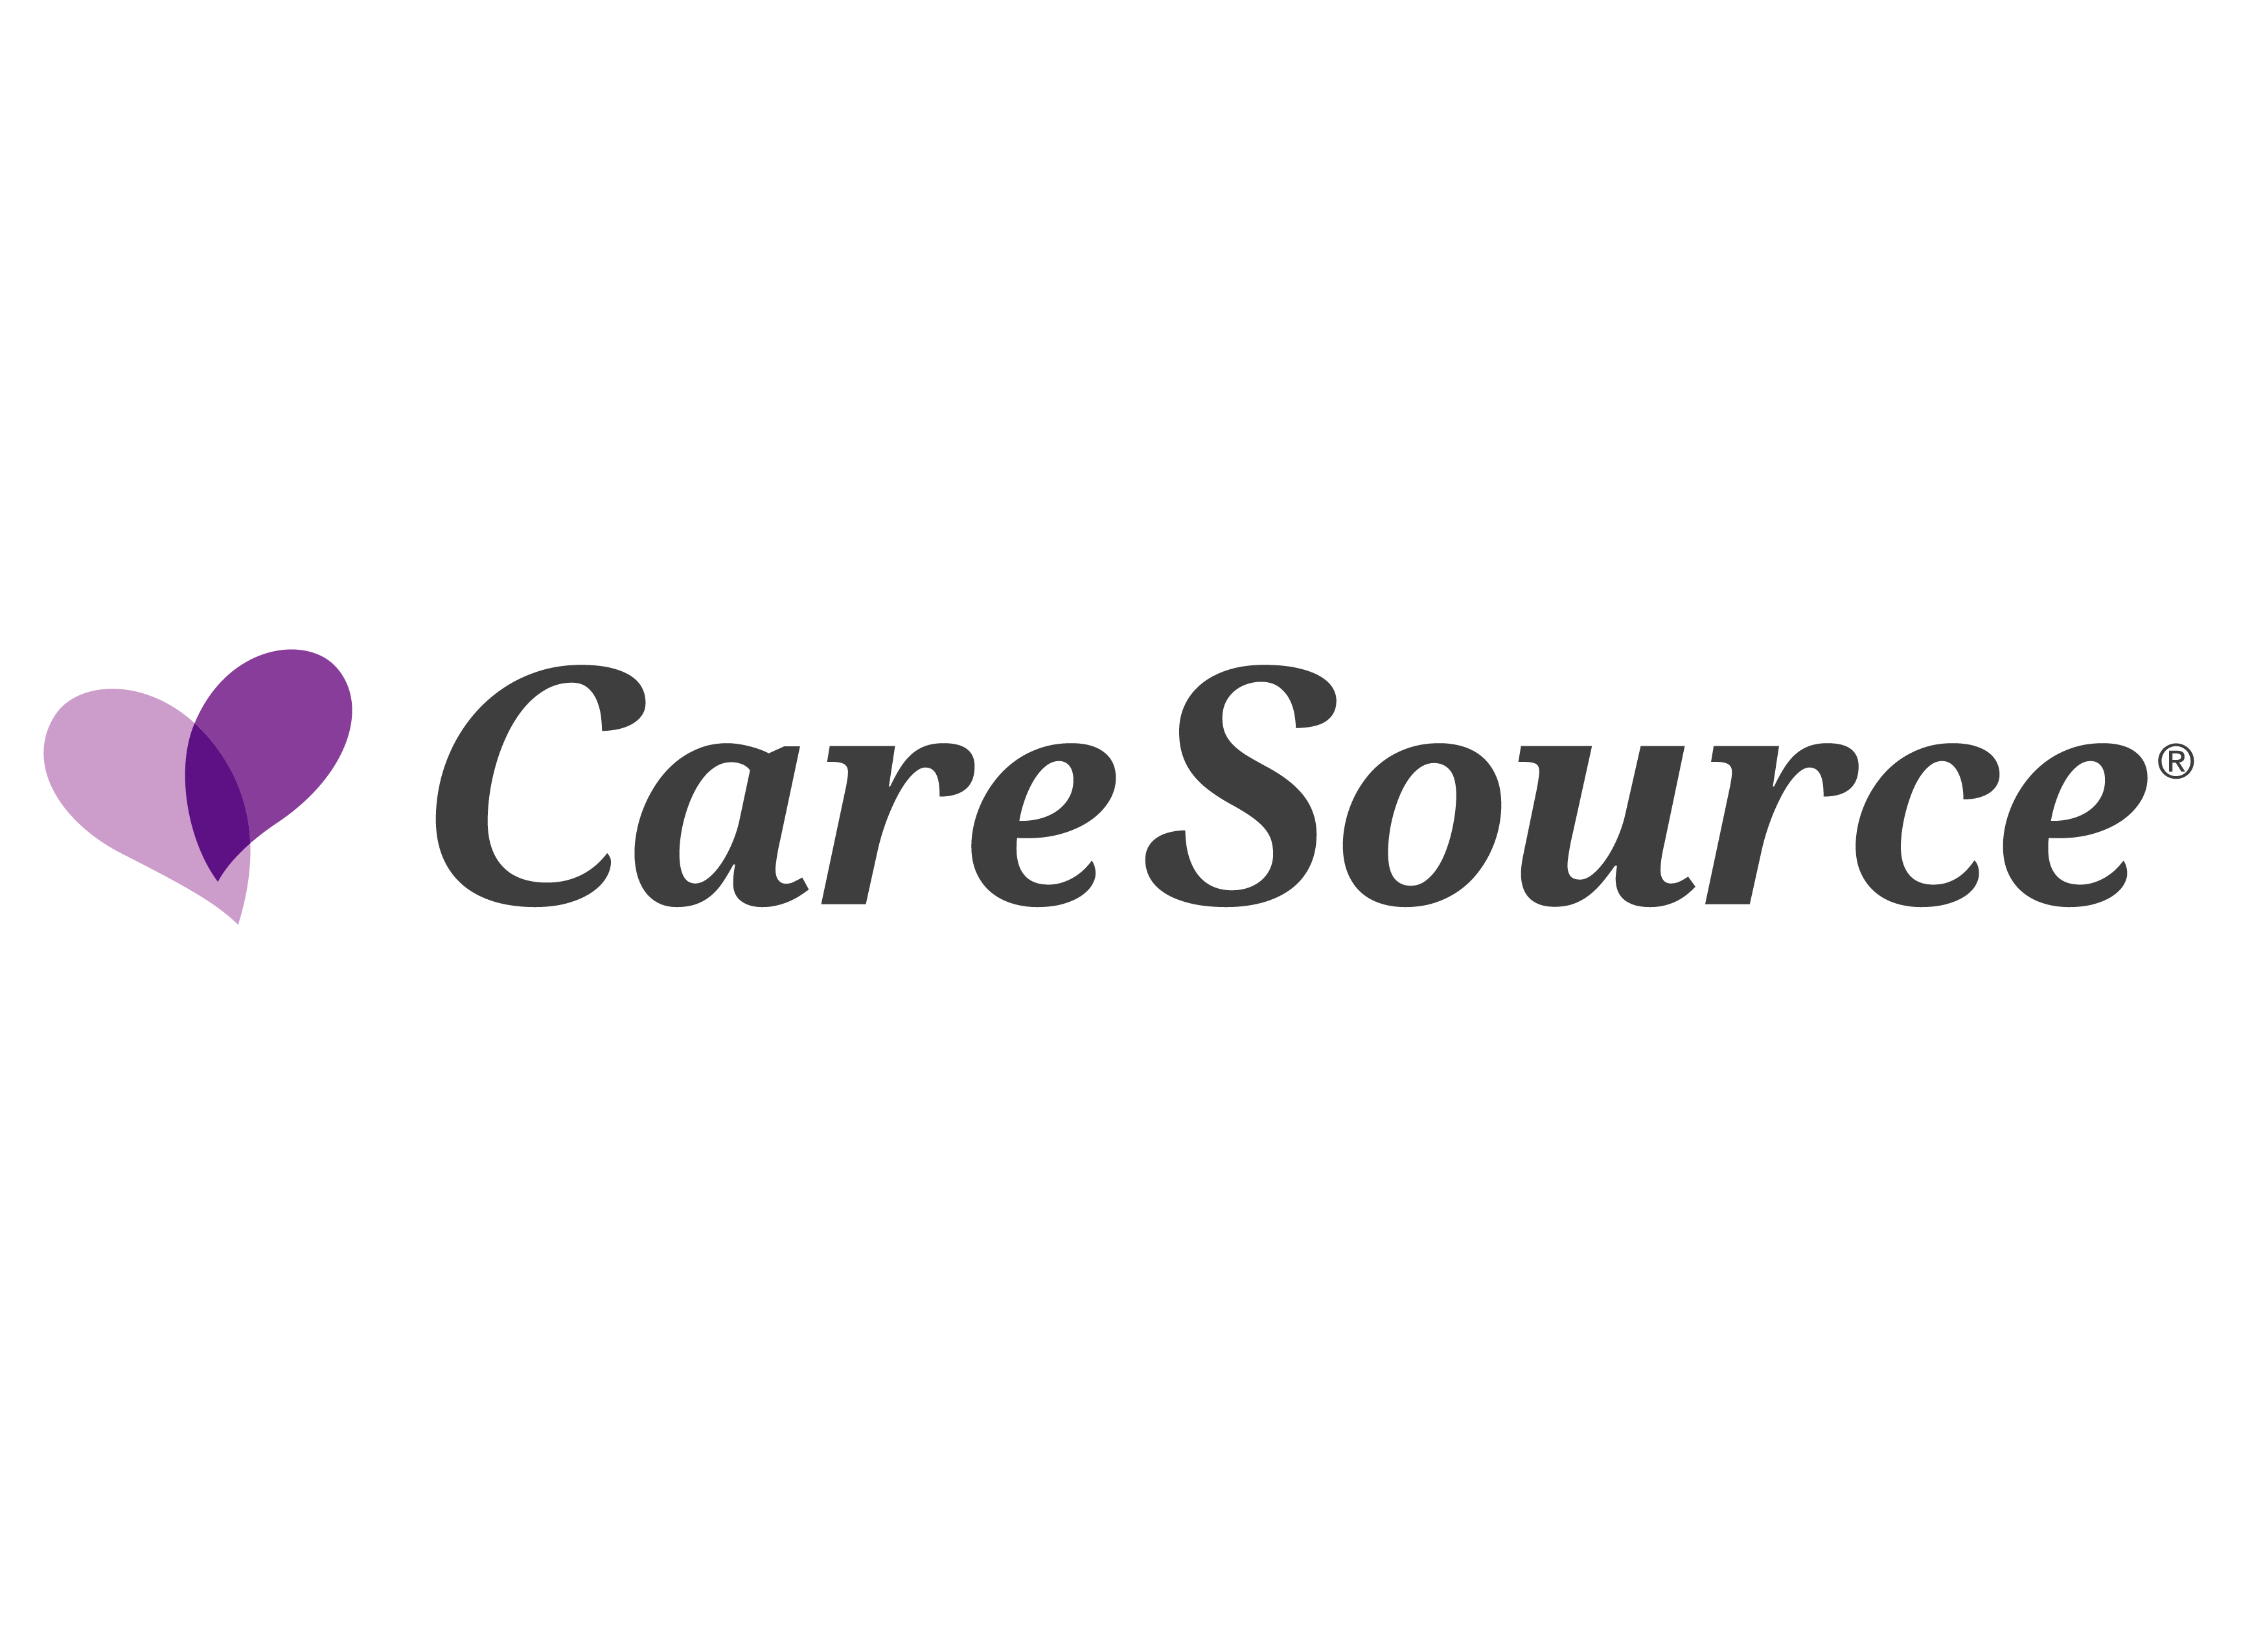 American caresource news opinions are nuanced